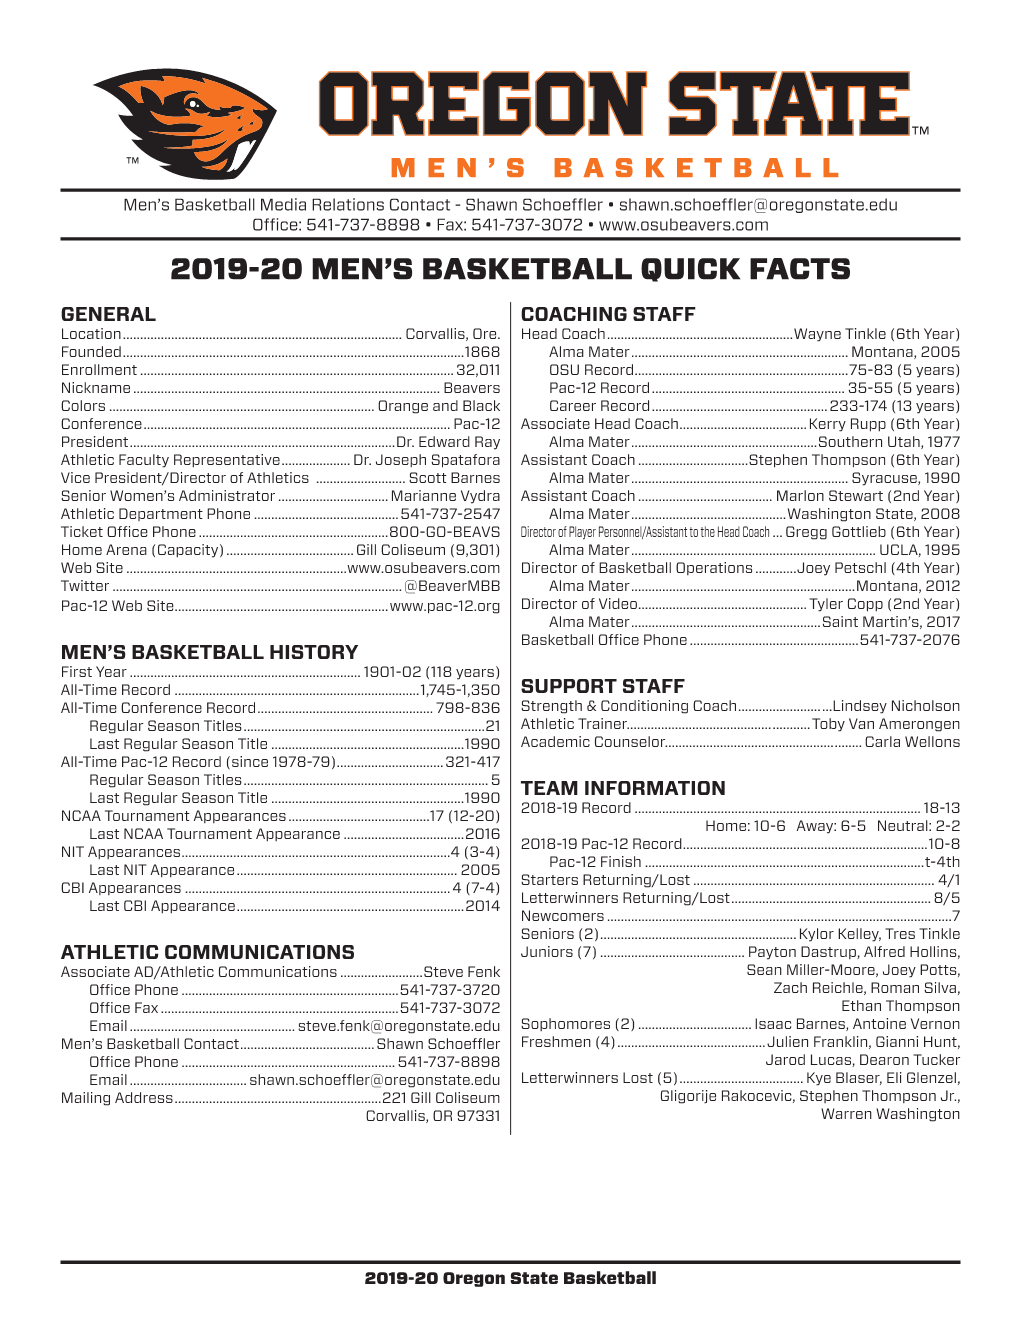 2019-20 Men's Basketball Quick Facts